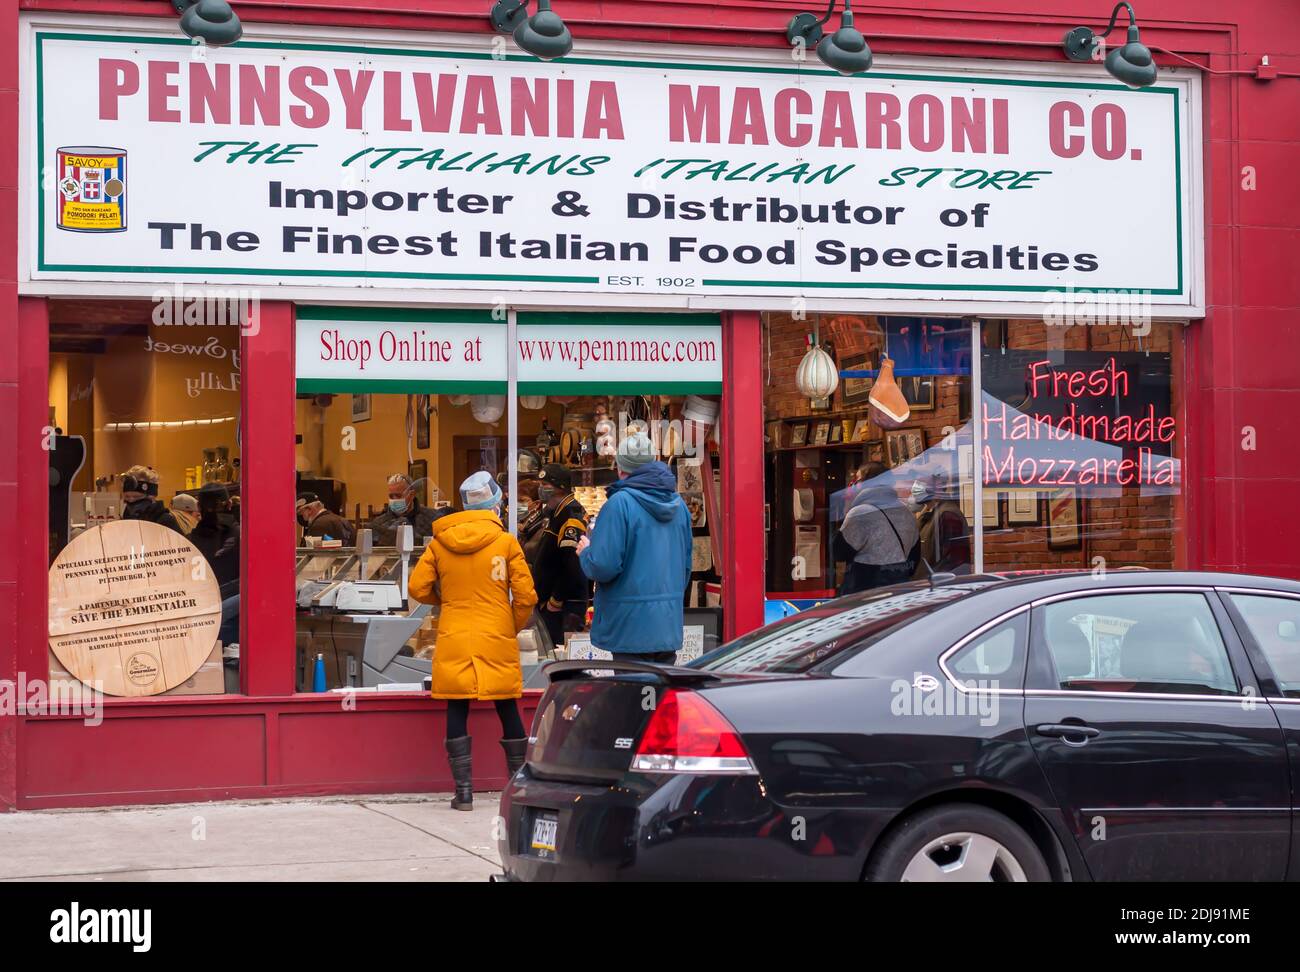 People standing in front of the Pennsylvania Macaroni Company store window on Penn Avenue, Pittsburgh, Pennsylvania, USA Stock Photo